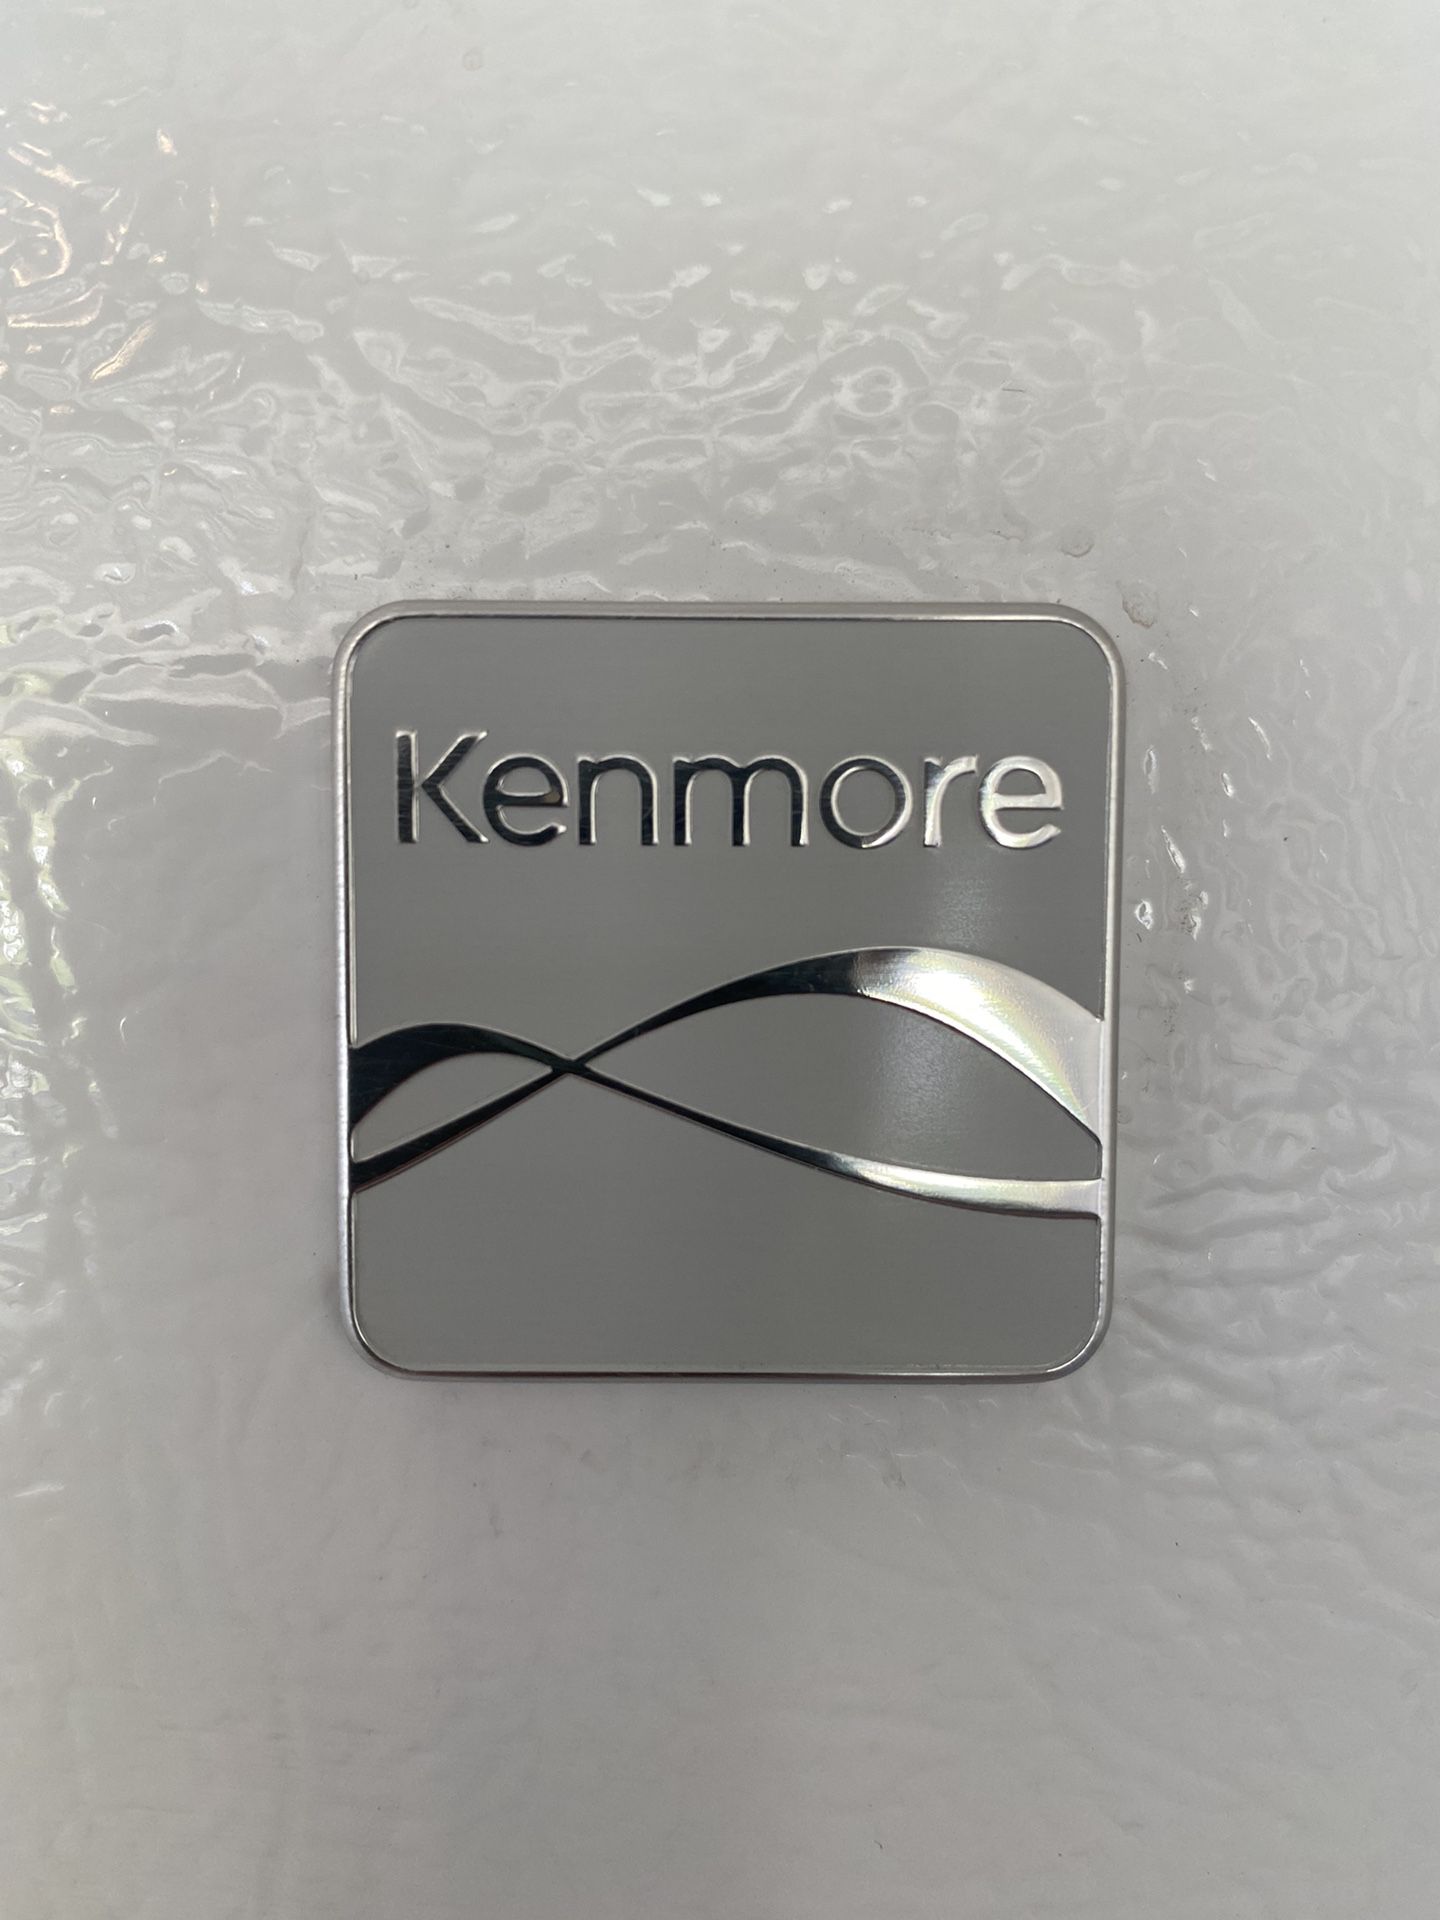 COLD🧊Kenmore refrigerator moving must go by this weekend